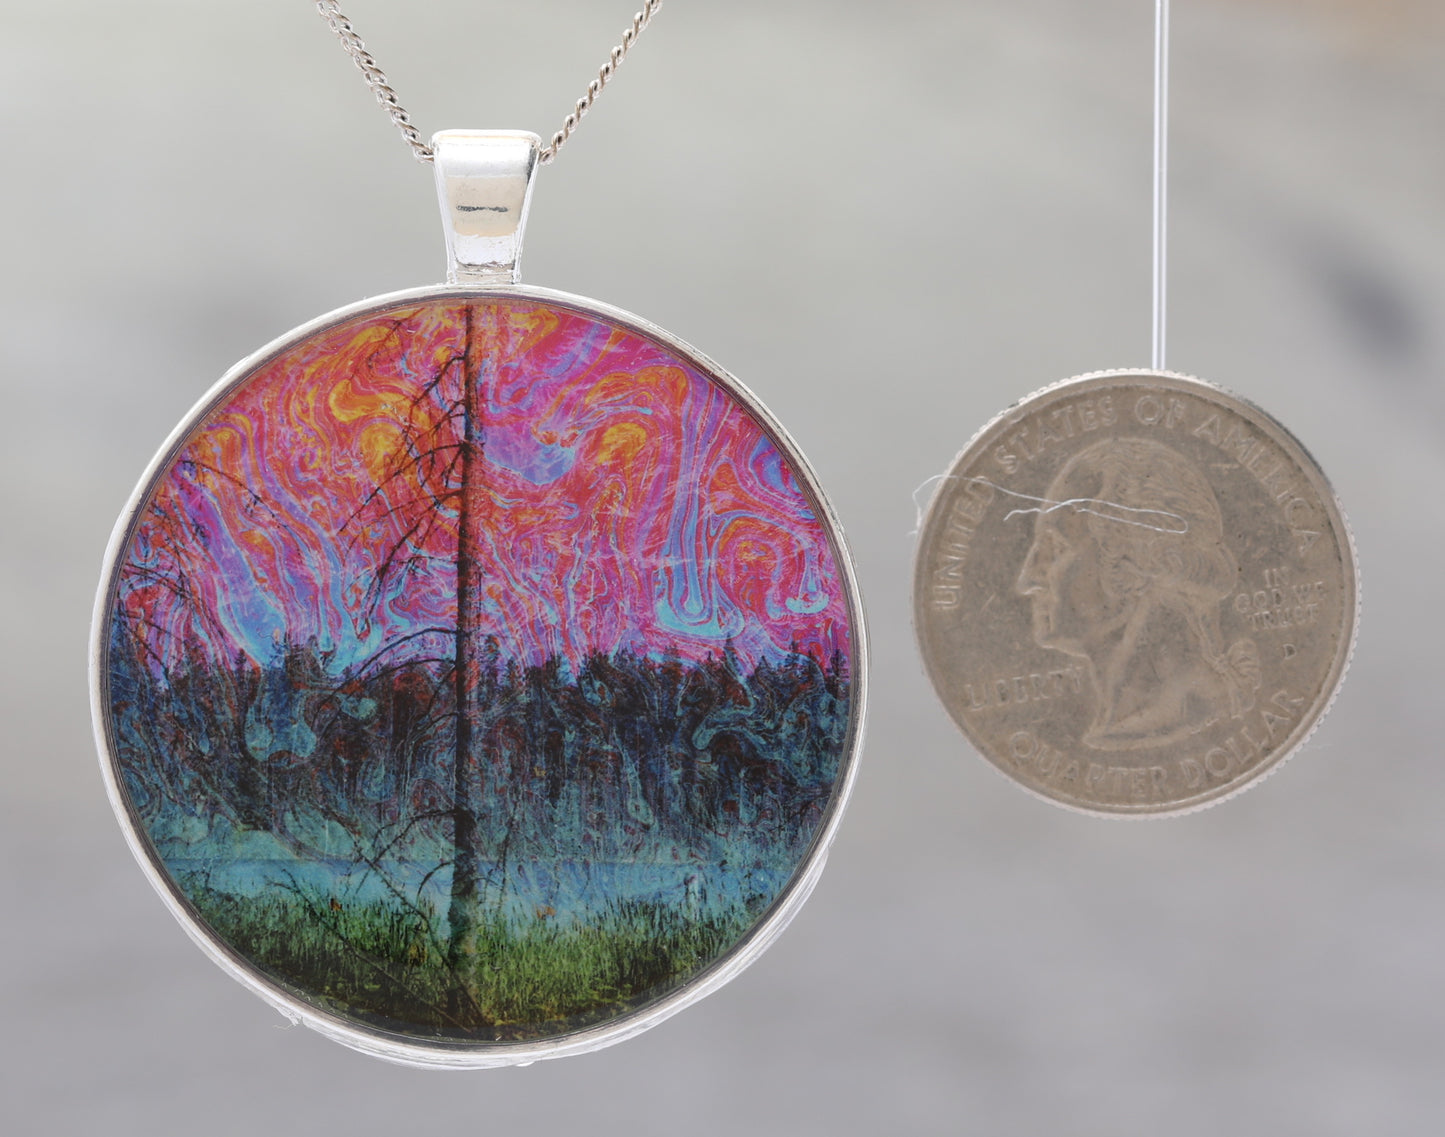 Spirited Pond  - Glow-in-the-dark pendant with a beautiful image of trees